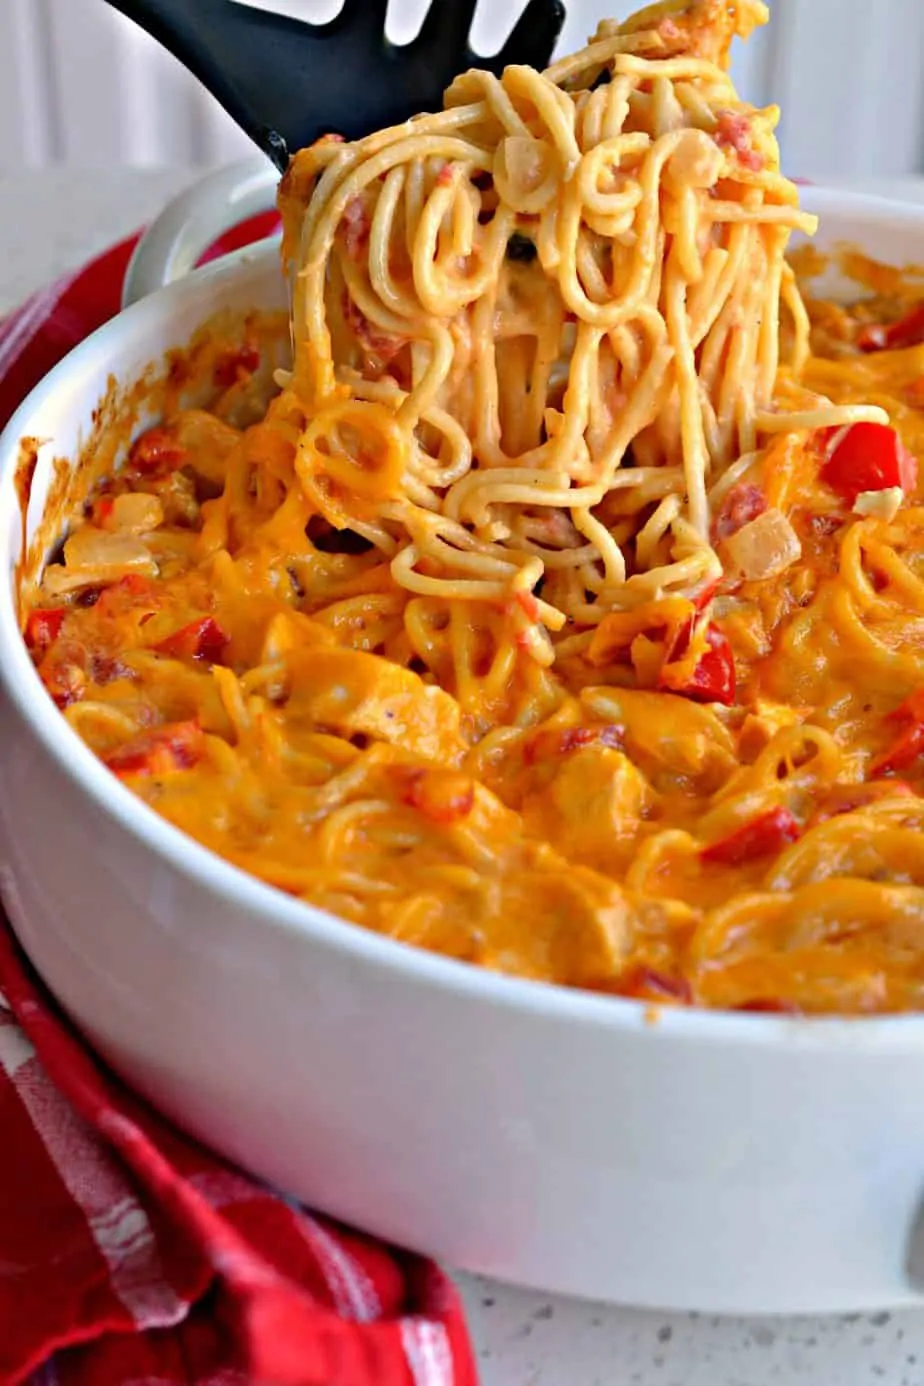 This Cheesy Chicken Spaghetti combines onions, bell peppers, chicken, tomatoes and green chilies in a creamy cheese sauce.